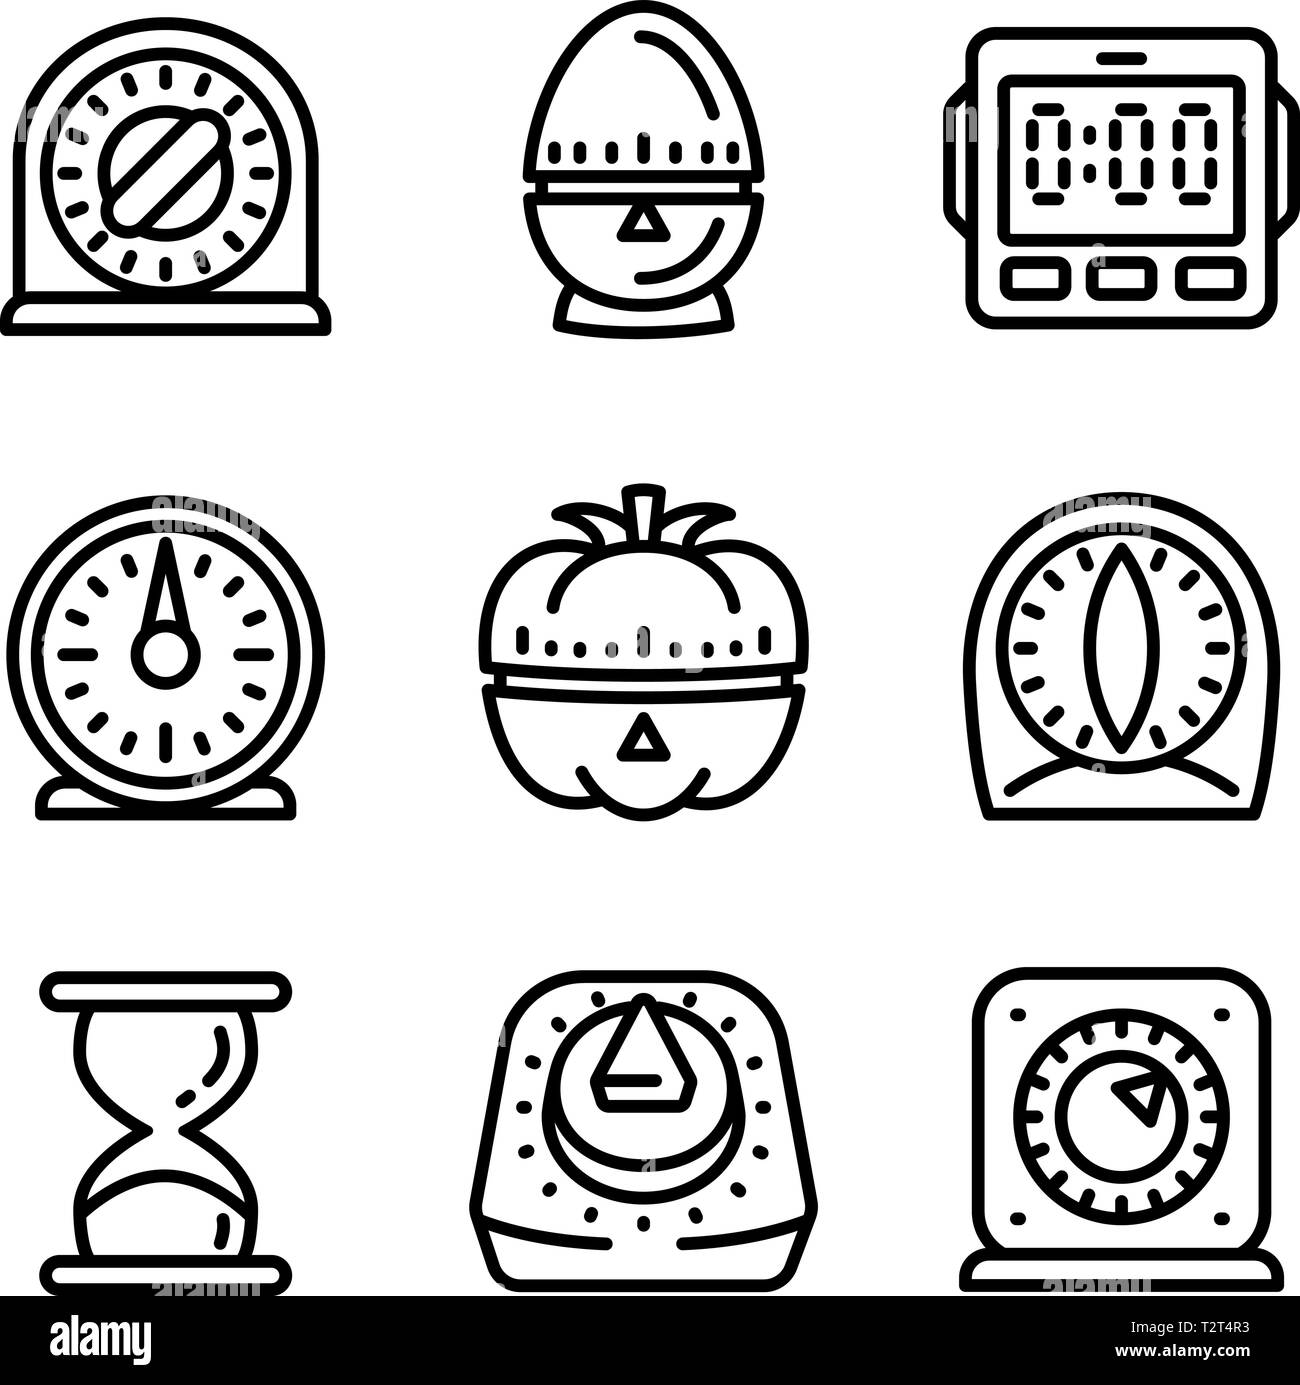 https://c8.alamy.com/comp/T2T4R3/kitchen-timer-icon-set-outline-set-of-kitchen-timer-vector-icons-for-web-design-isolated-on-white-background-T2T4R3.jpg